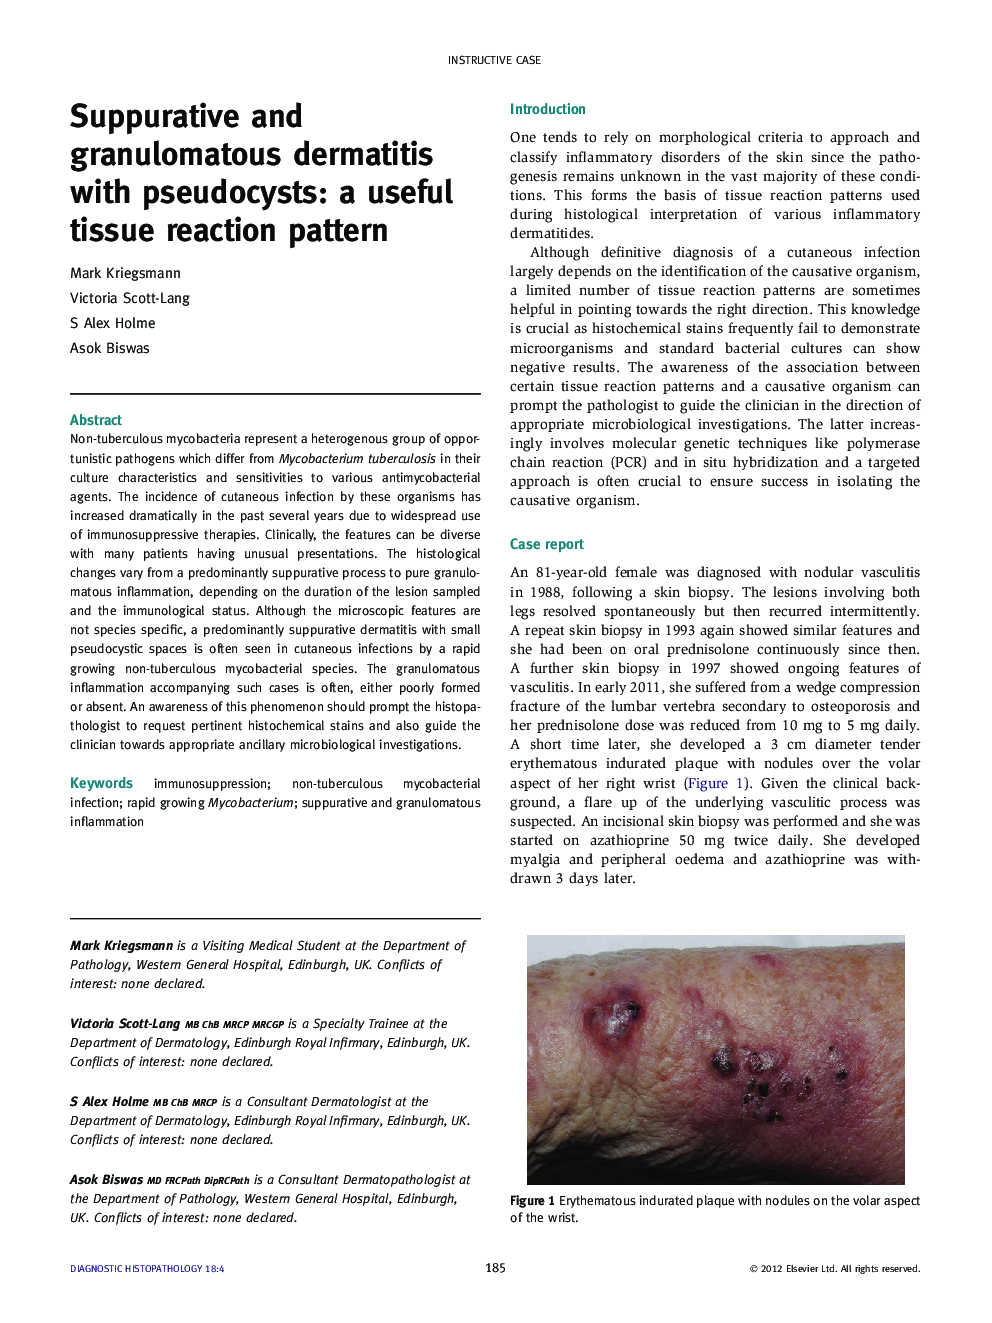 Suppurative and granulomatous dermatitis with pseudocysts: a useful tissue reaction pattern